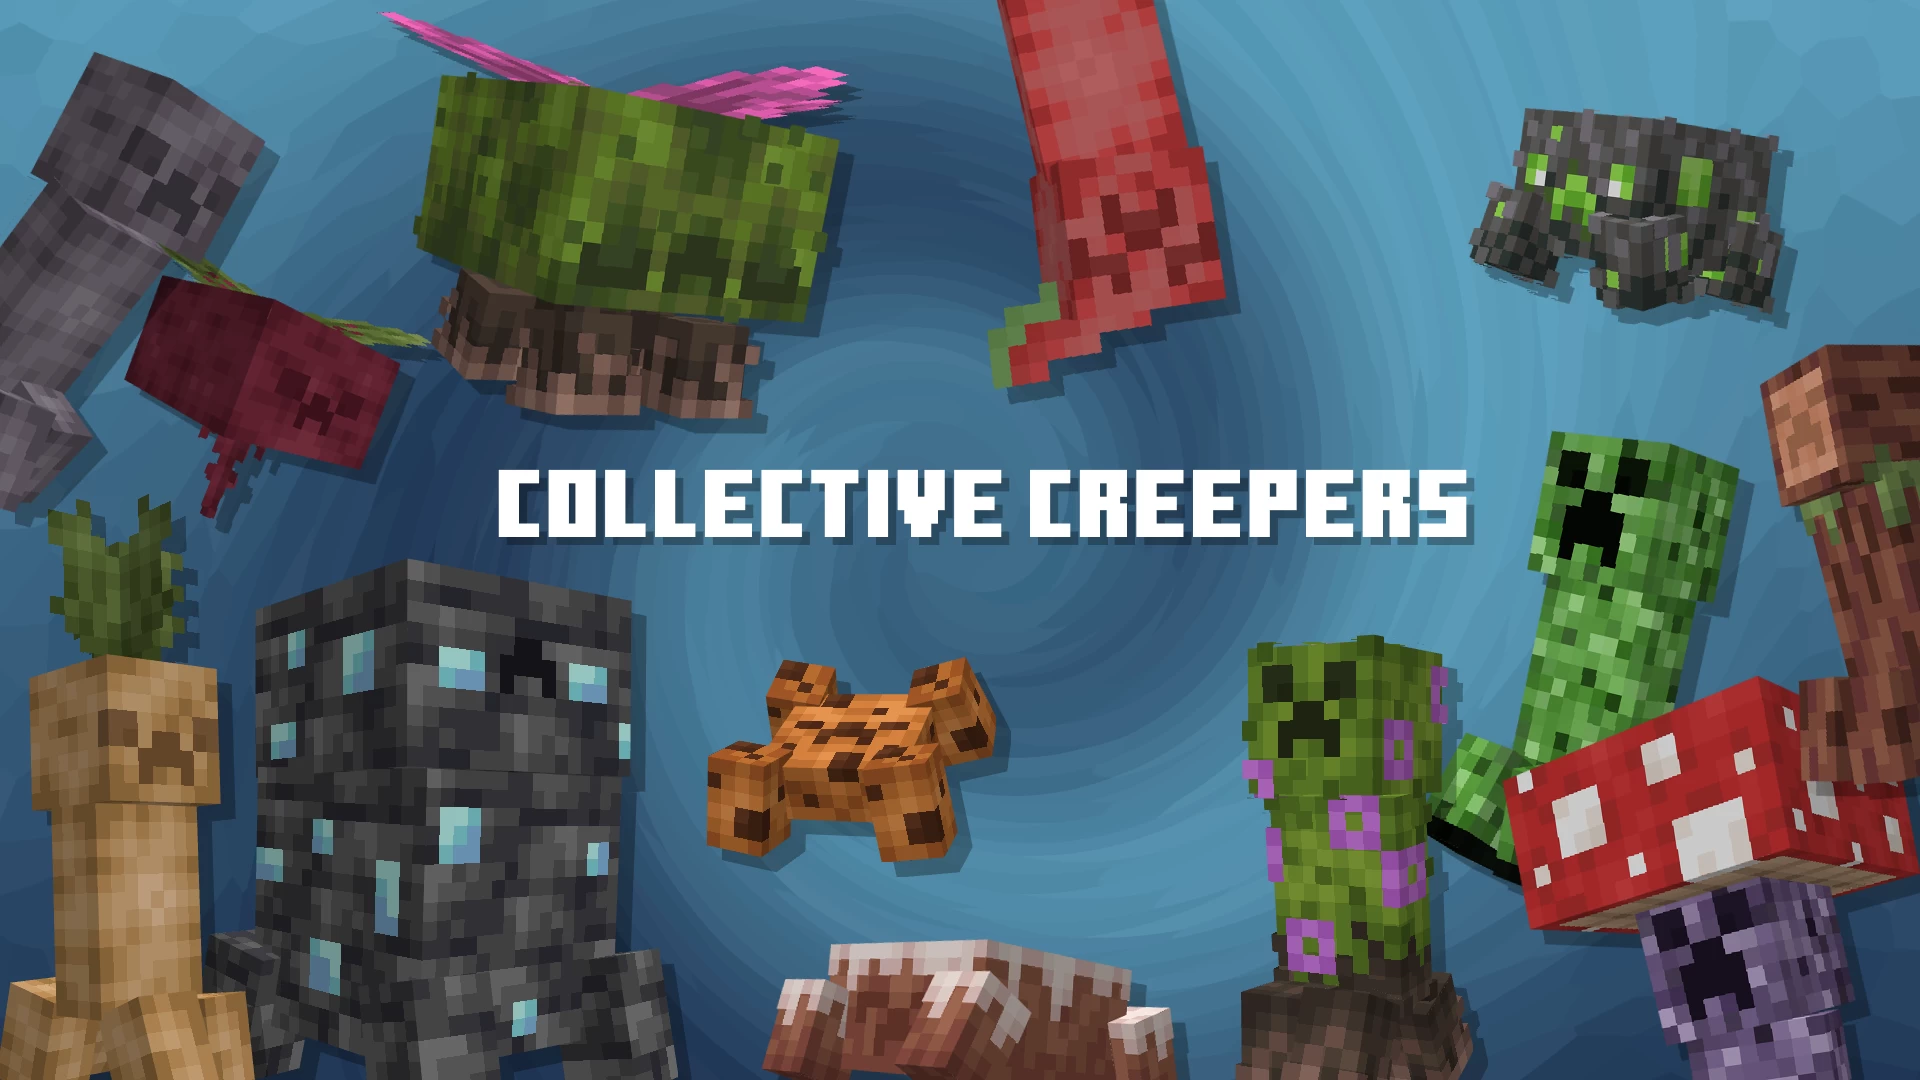 Collective Creepers screenshot 1